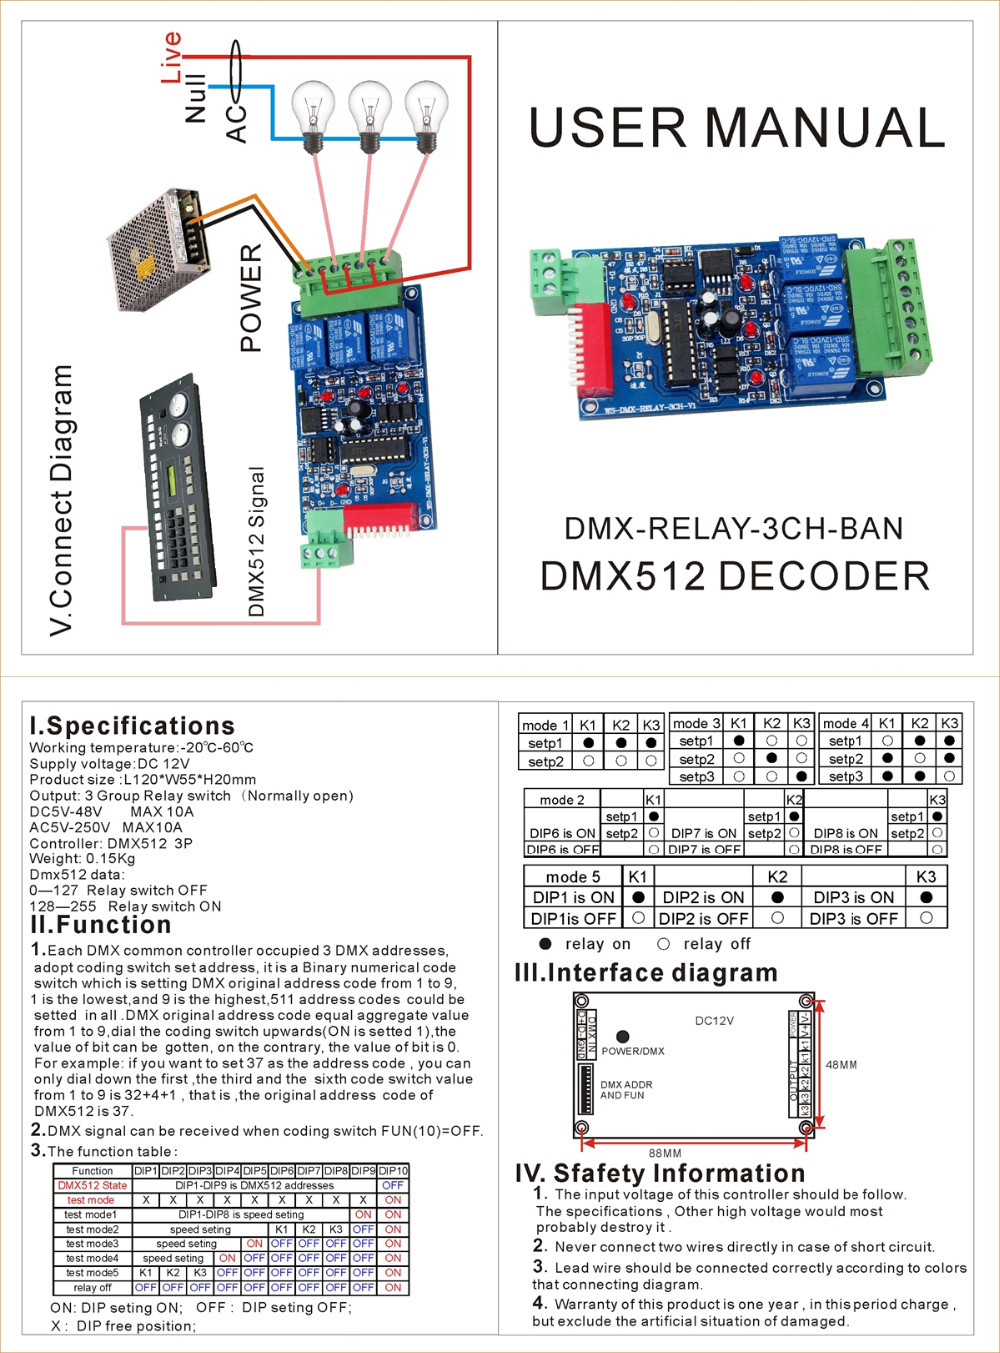 DMX_Controllers_and_Decoders_WS_DMX_RELAY_3CH_BAN_2